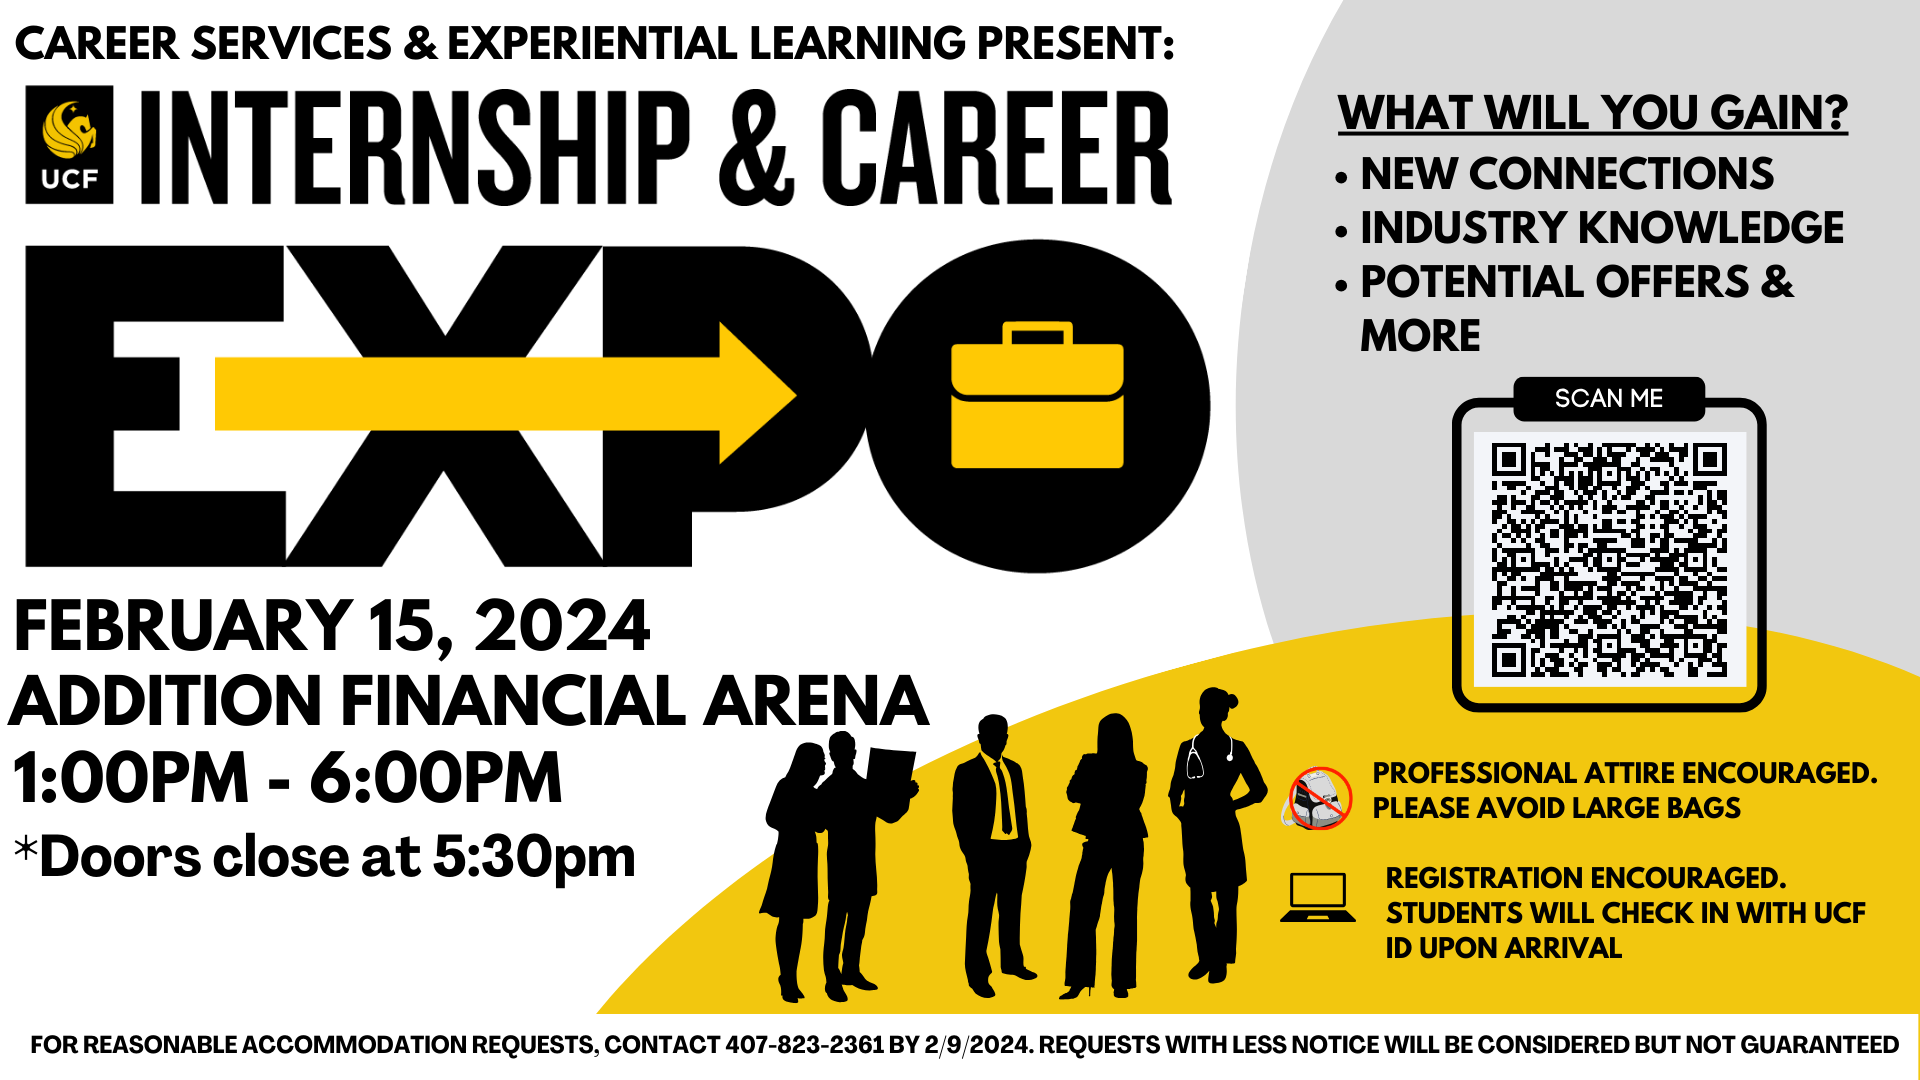 Career Services & Experiential Learning Present: Internship & Career EXPO Feb 15, 2024 Addition Financial Arena 1-6pm Doors close at 5:30PM What will you gain? new connections, industry knowledge, potential offers & more. Professional attire encouraged. Please avoid large bags. Registration encouraged. Students will check in with UCF ID upon arrival. For reasonable accommodation requests, contact 407-823-2361 by 2/9/2024. Requests with less notice will be considered but not guaranteed.